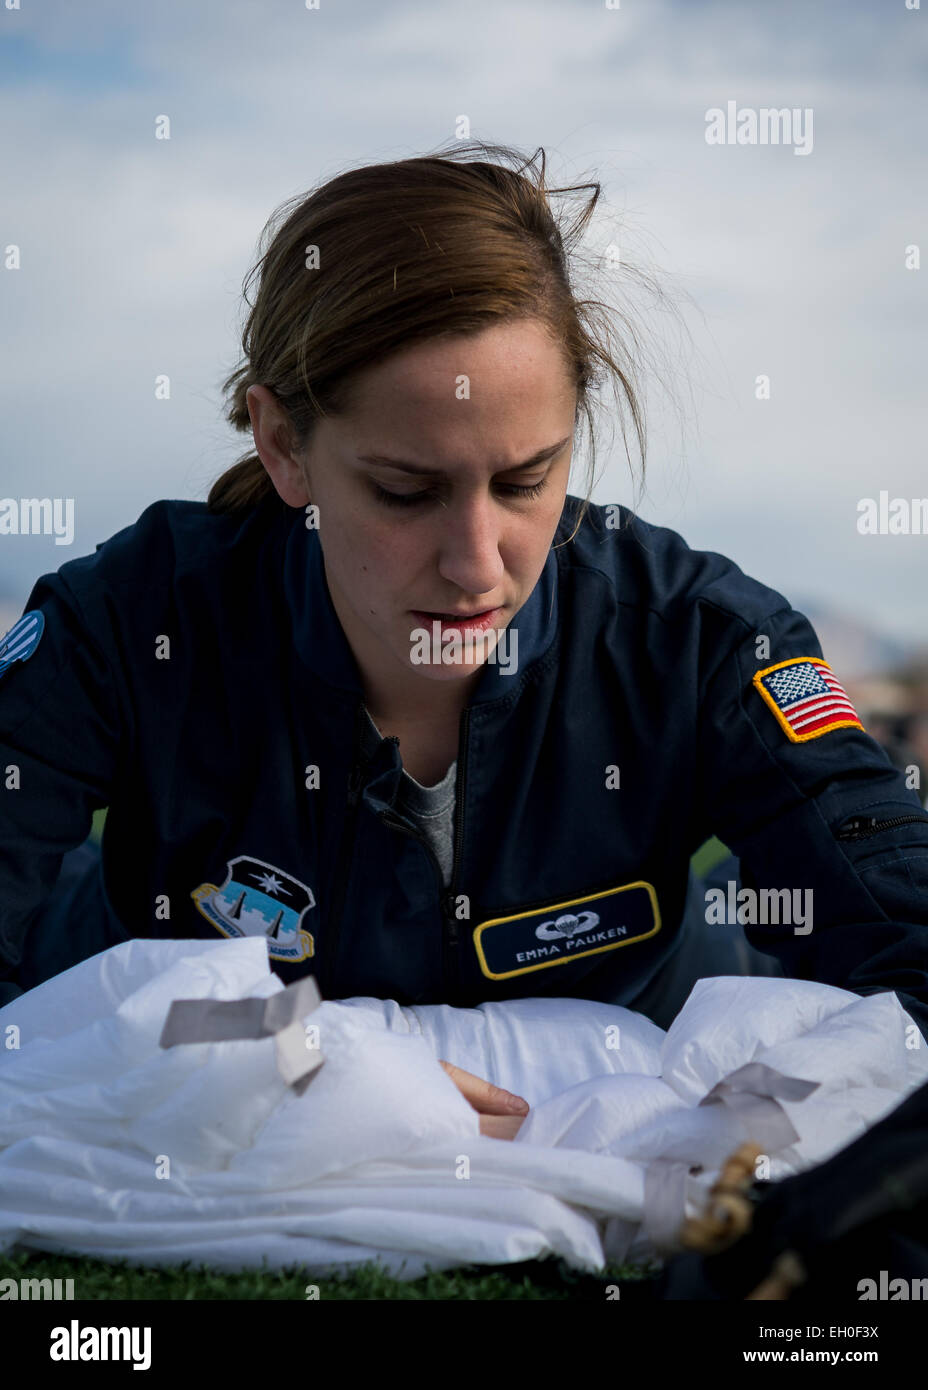 Cadet 2nd Class Emma Pauken, 98th Flying Training Squadron Wings of Blue parachutist, a Keene, NH native, packs her equipment after preforming in an aerial demonstration for the opening ceremonies of the Air Force Wounded Warrior (AFW2) 2015 Trials  on Nellis Air Force Base, NV, February 27. The AFW2 Trials are an adaptive sports event designed to promote the mental and physical well-being of seriously ill and injured military members and veterans. More than 105 wounded, ill or injured service men and women from around the country will compete for a spot on the 2015 U.S. Air Force Wounded Warr Stock Photo